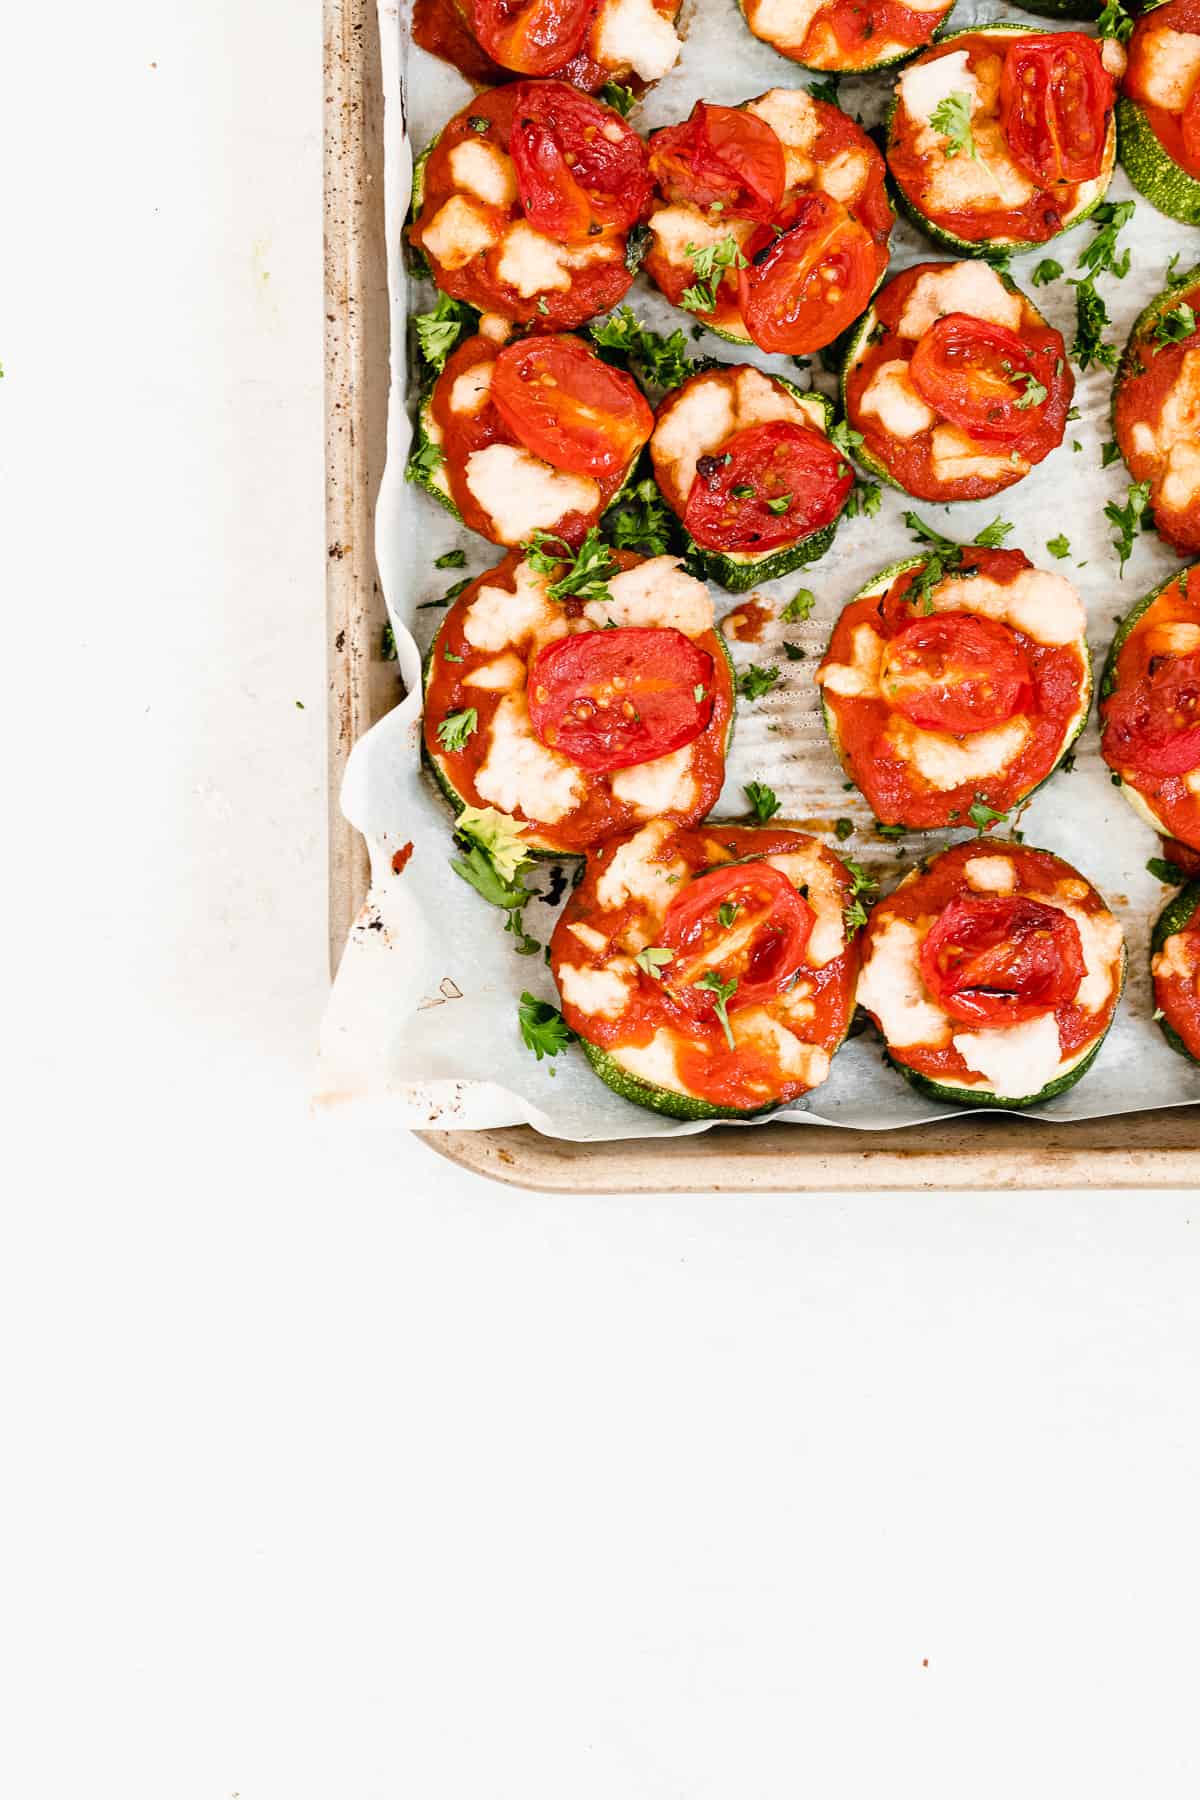 Baking sheet filled with zucchini topped with cheese and tomato sauce.